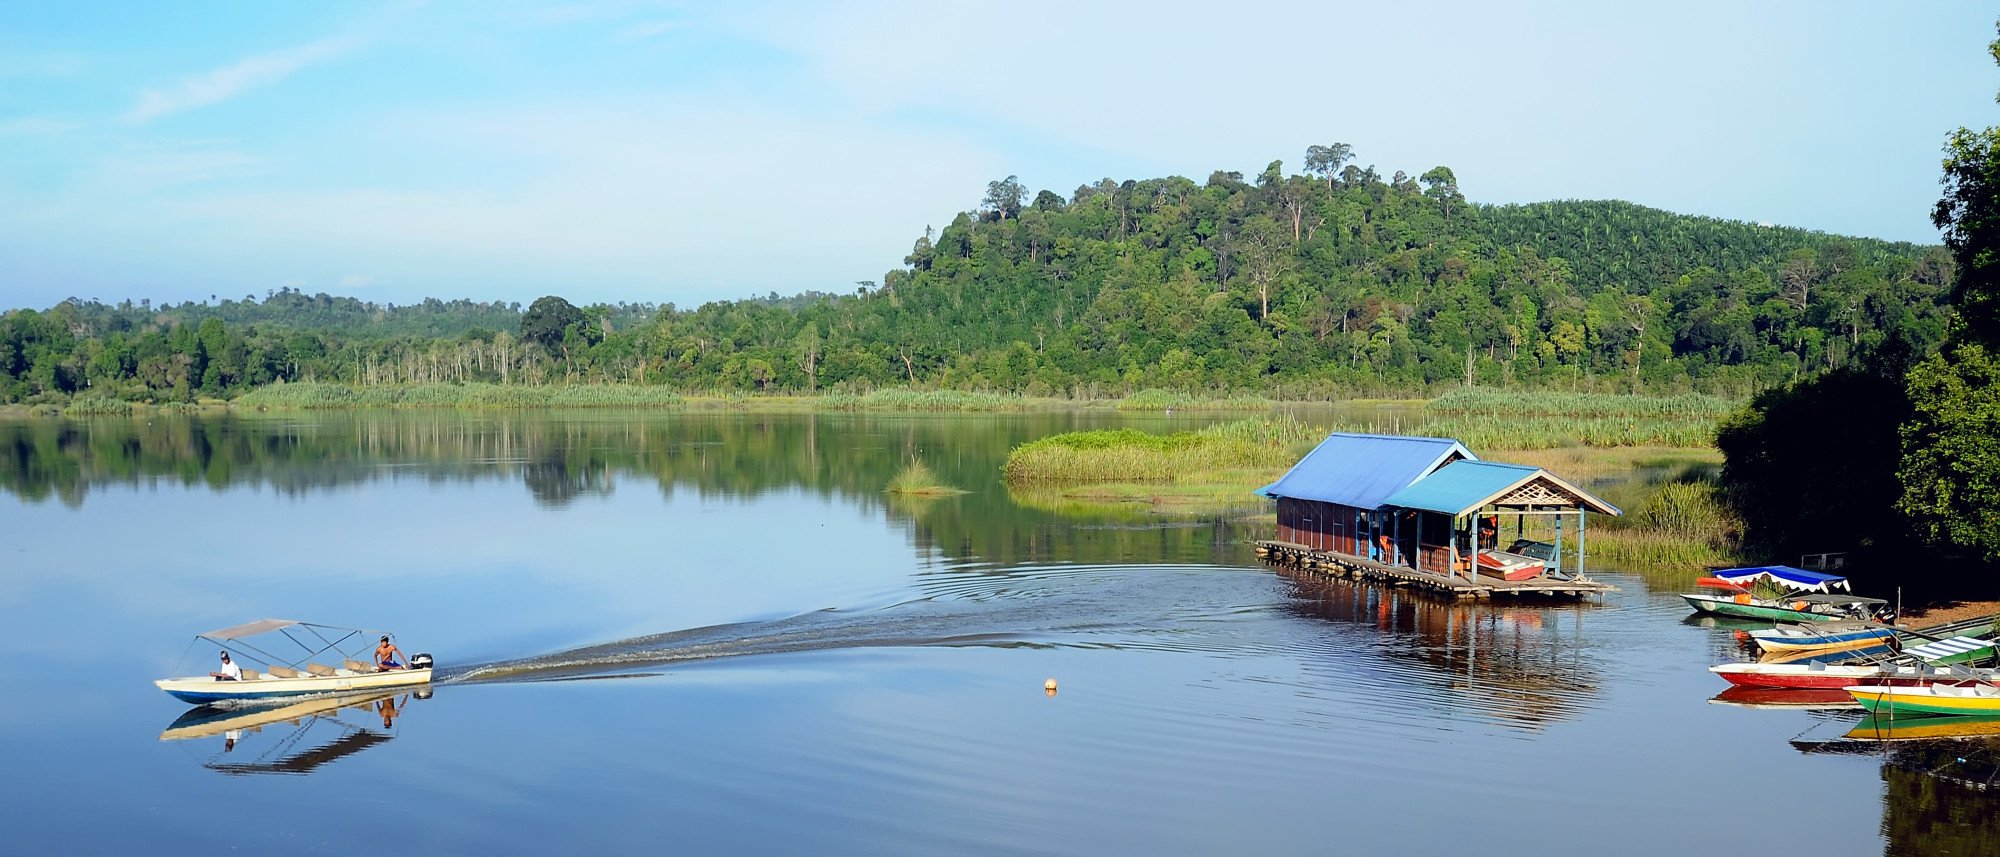 A boat crosses Tasik Chini. The lake is rumoured to be the home of a mythical ‘dragon god’. Photo: Shutterstock